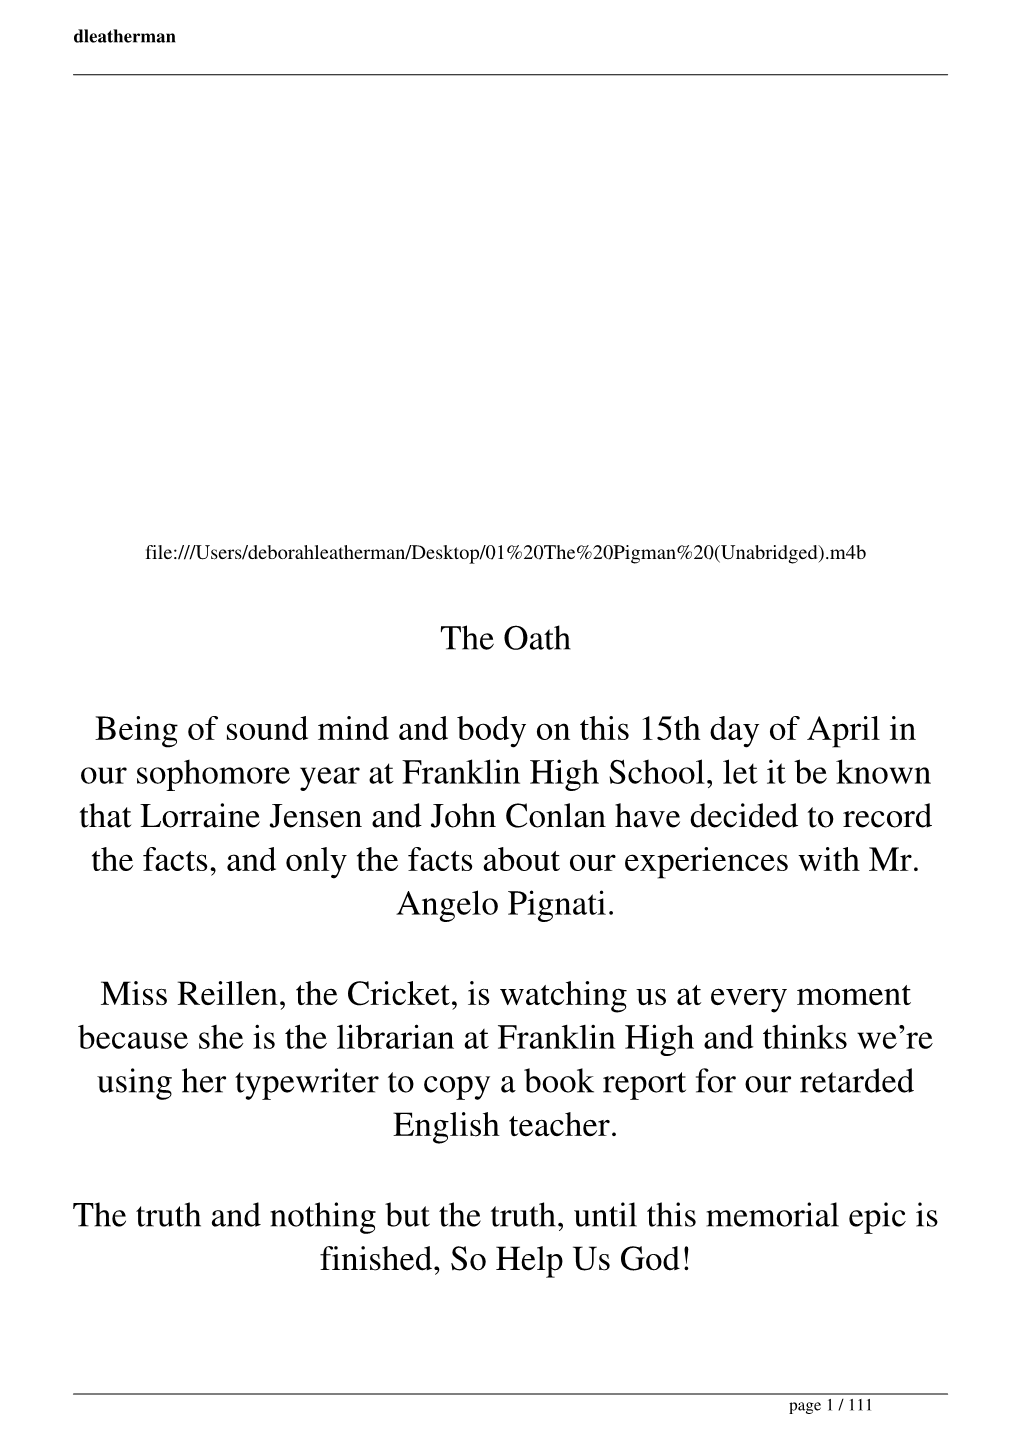 The Oath Being of Sound Mind and Body on This 15Th Day of April in Our